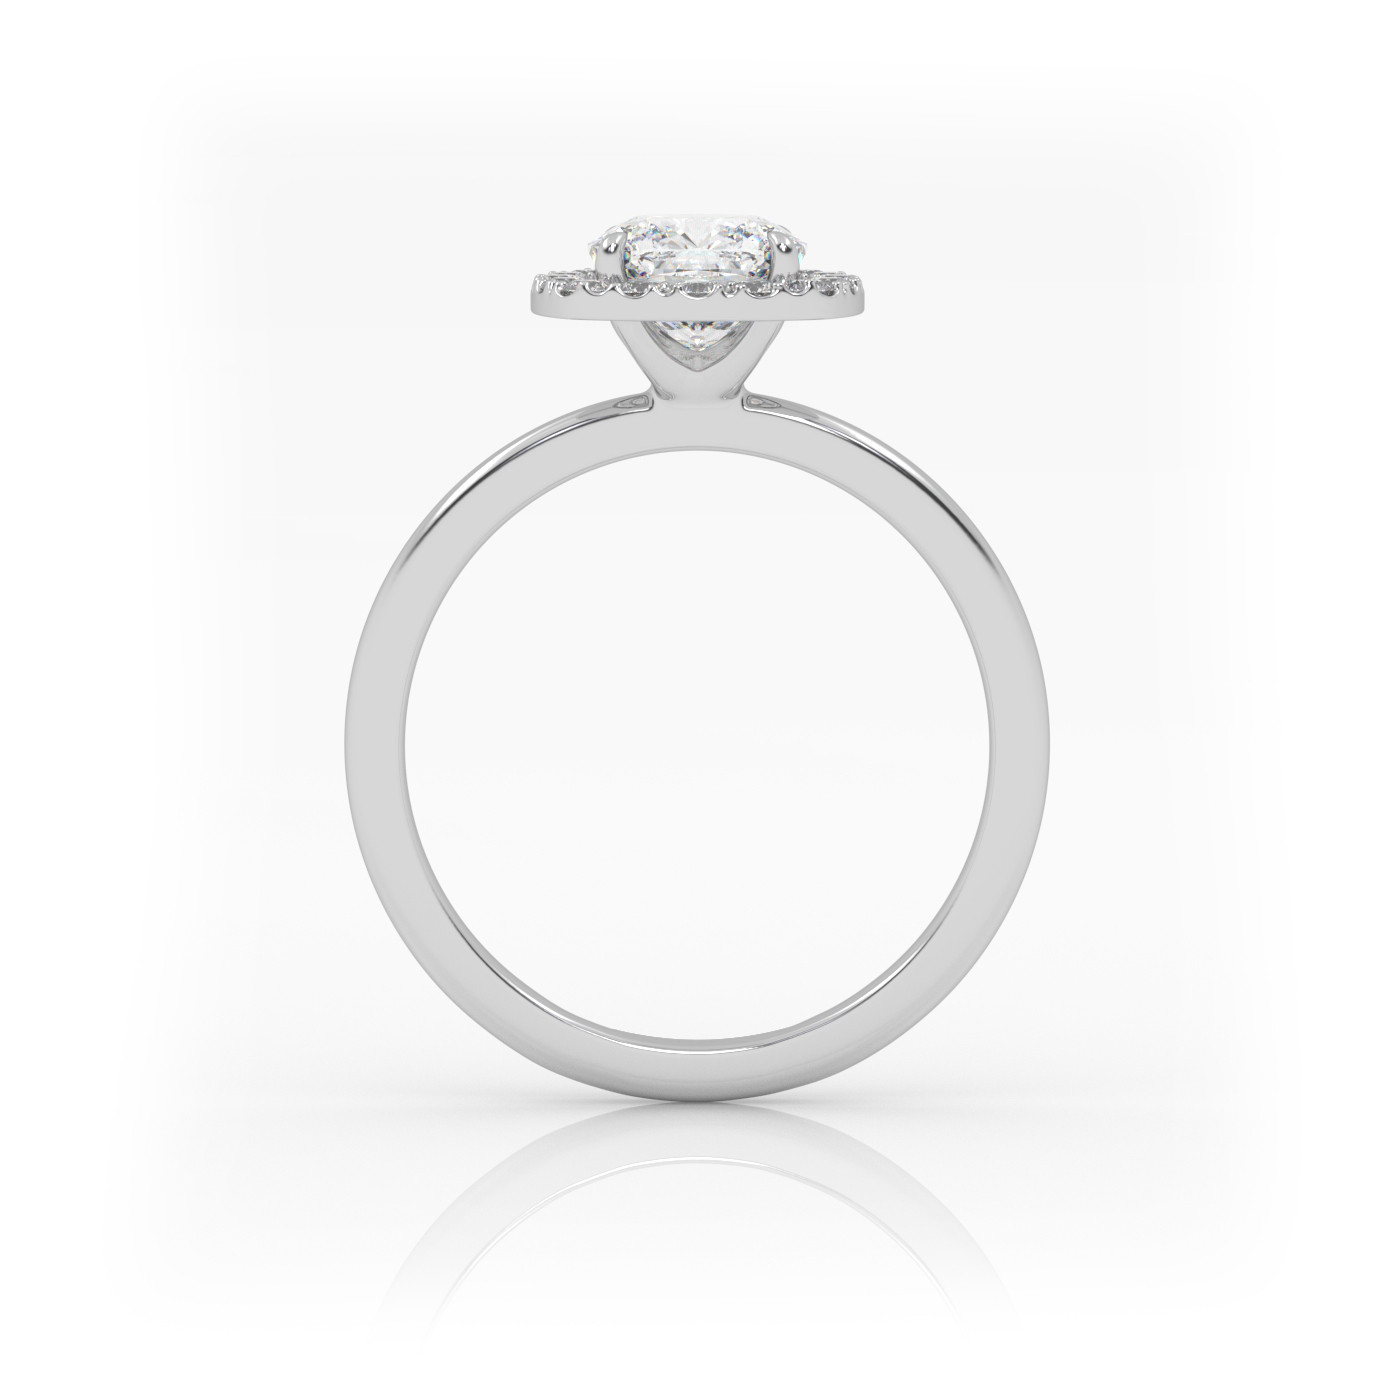 18K WHITE GOLD Cushion Cut Engagement Ring with Halo Style